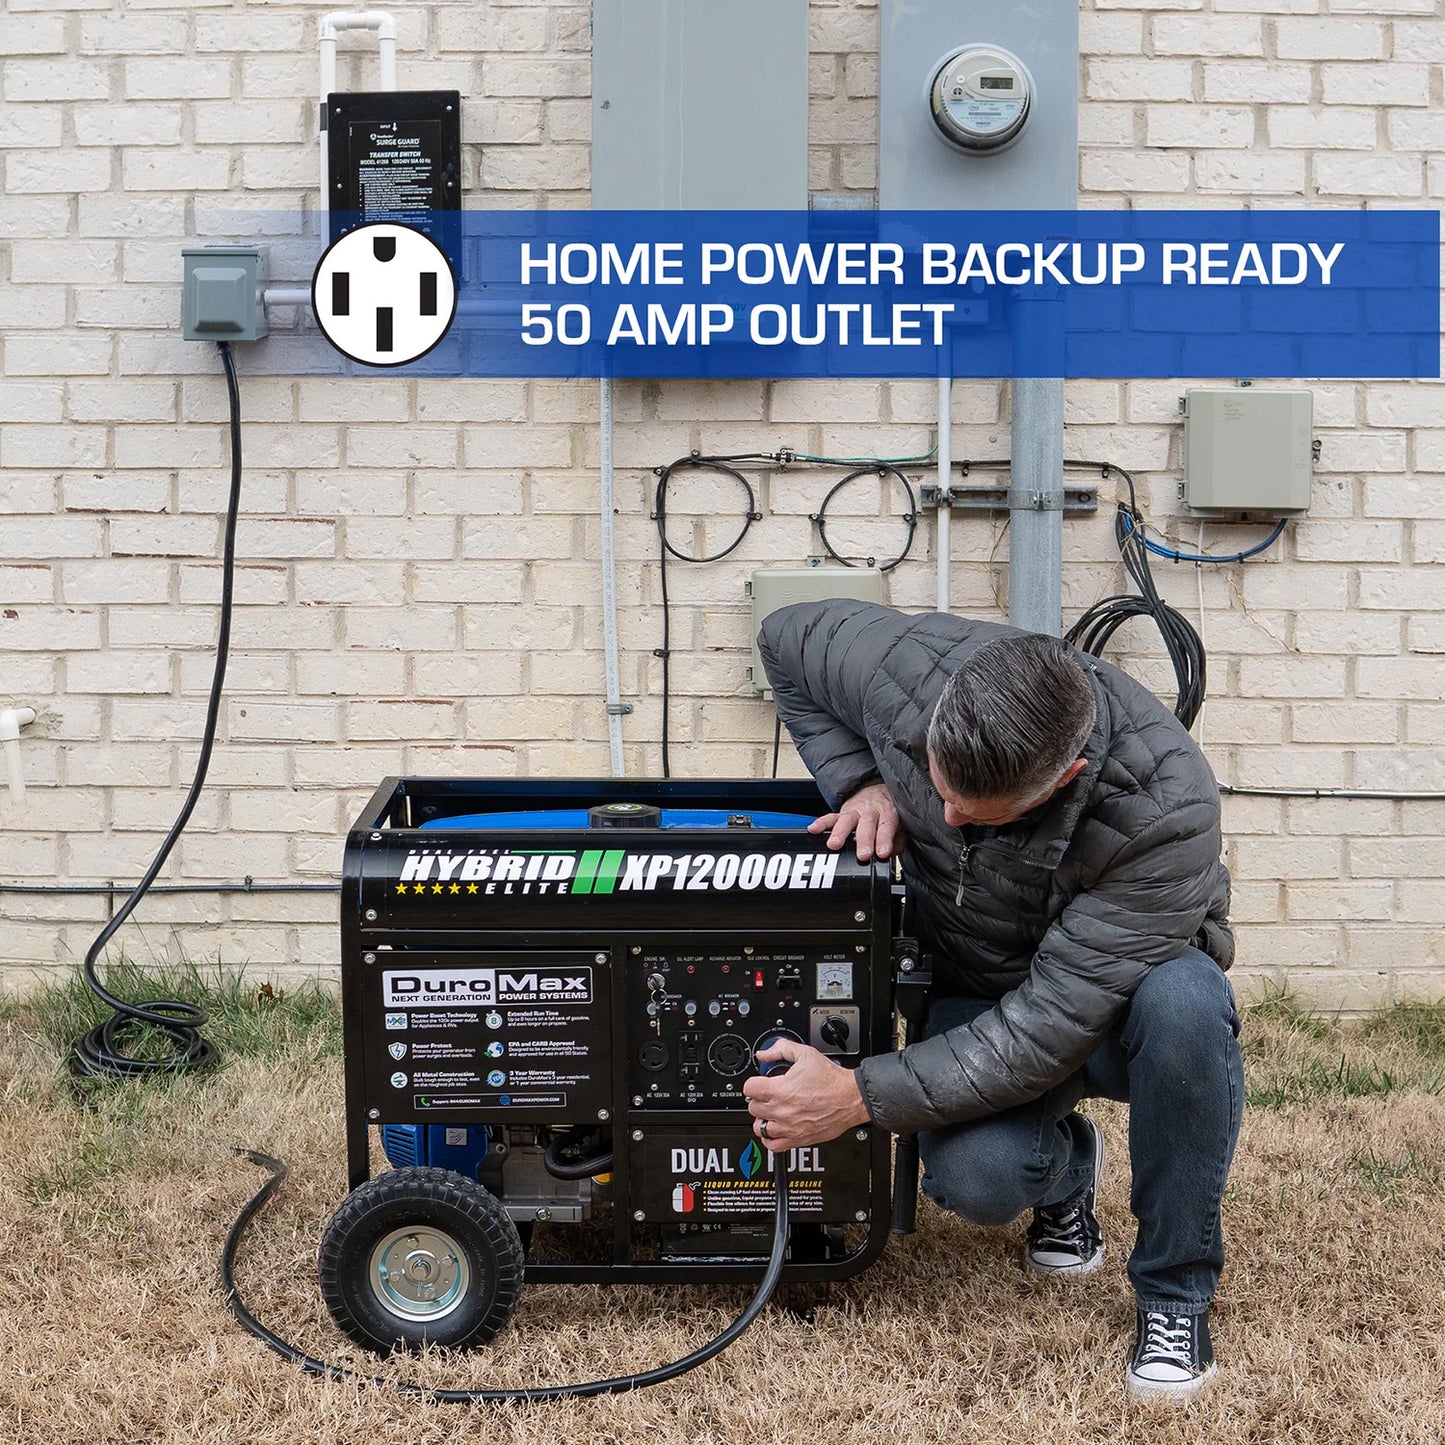 DuroMax XP12000EH Dual Fuel Portable Generator - Home Power Backup Ready With A 50 AMP Outlet